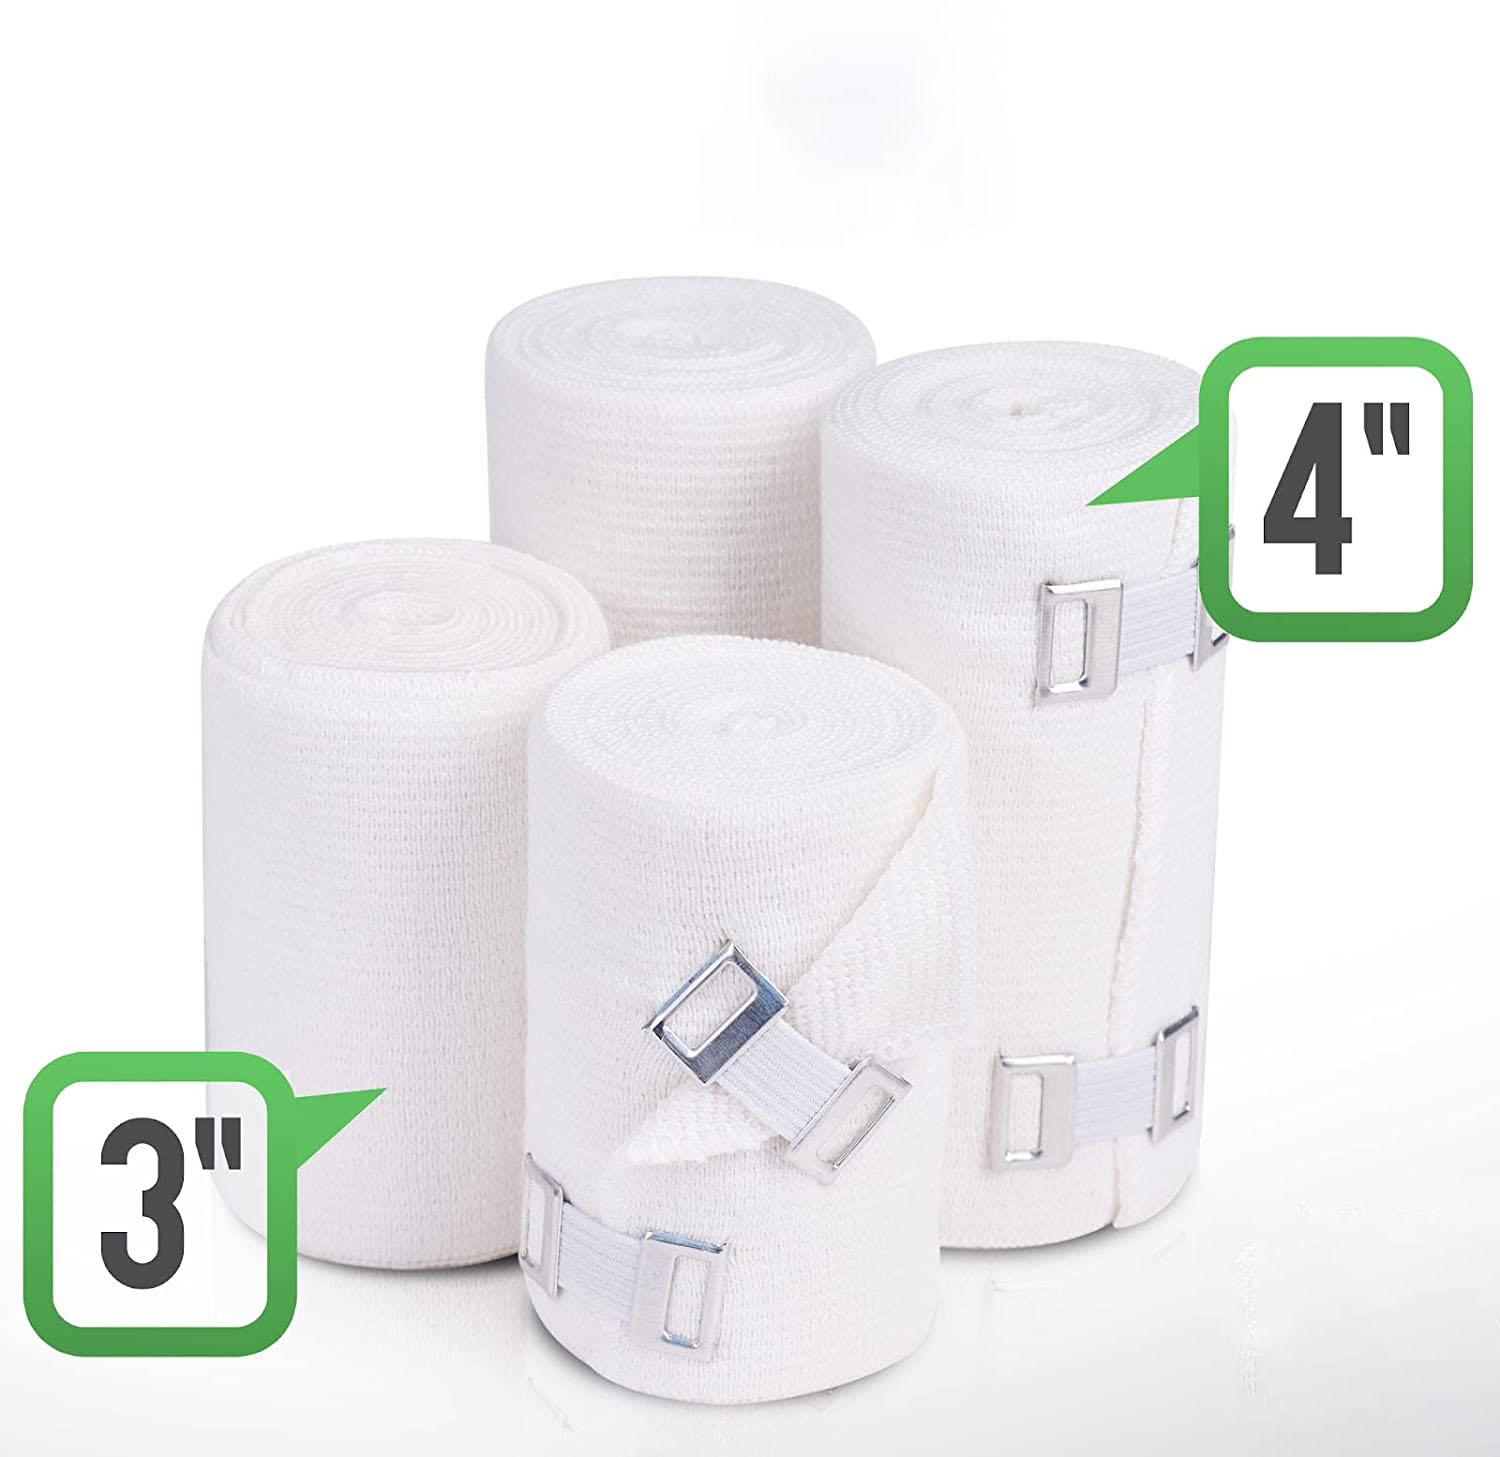 Comfortable White Elastic Cotton Sports Bandages with Clip